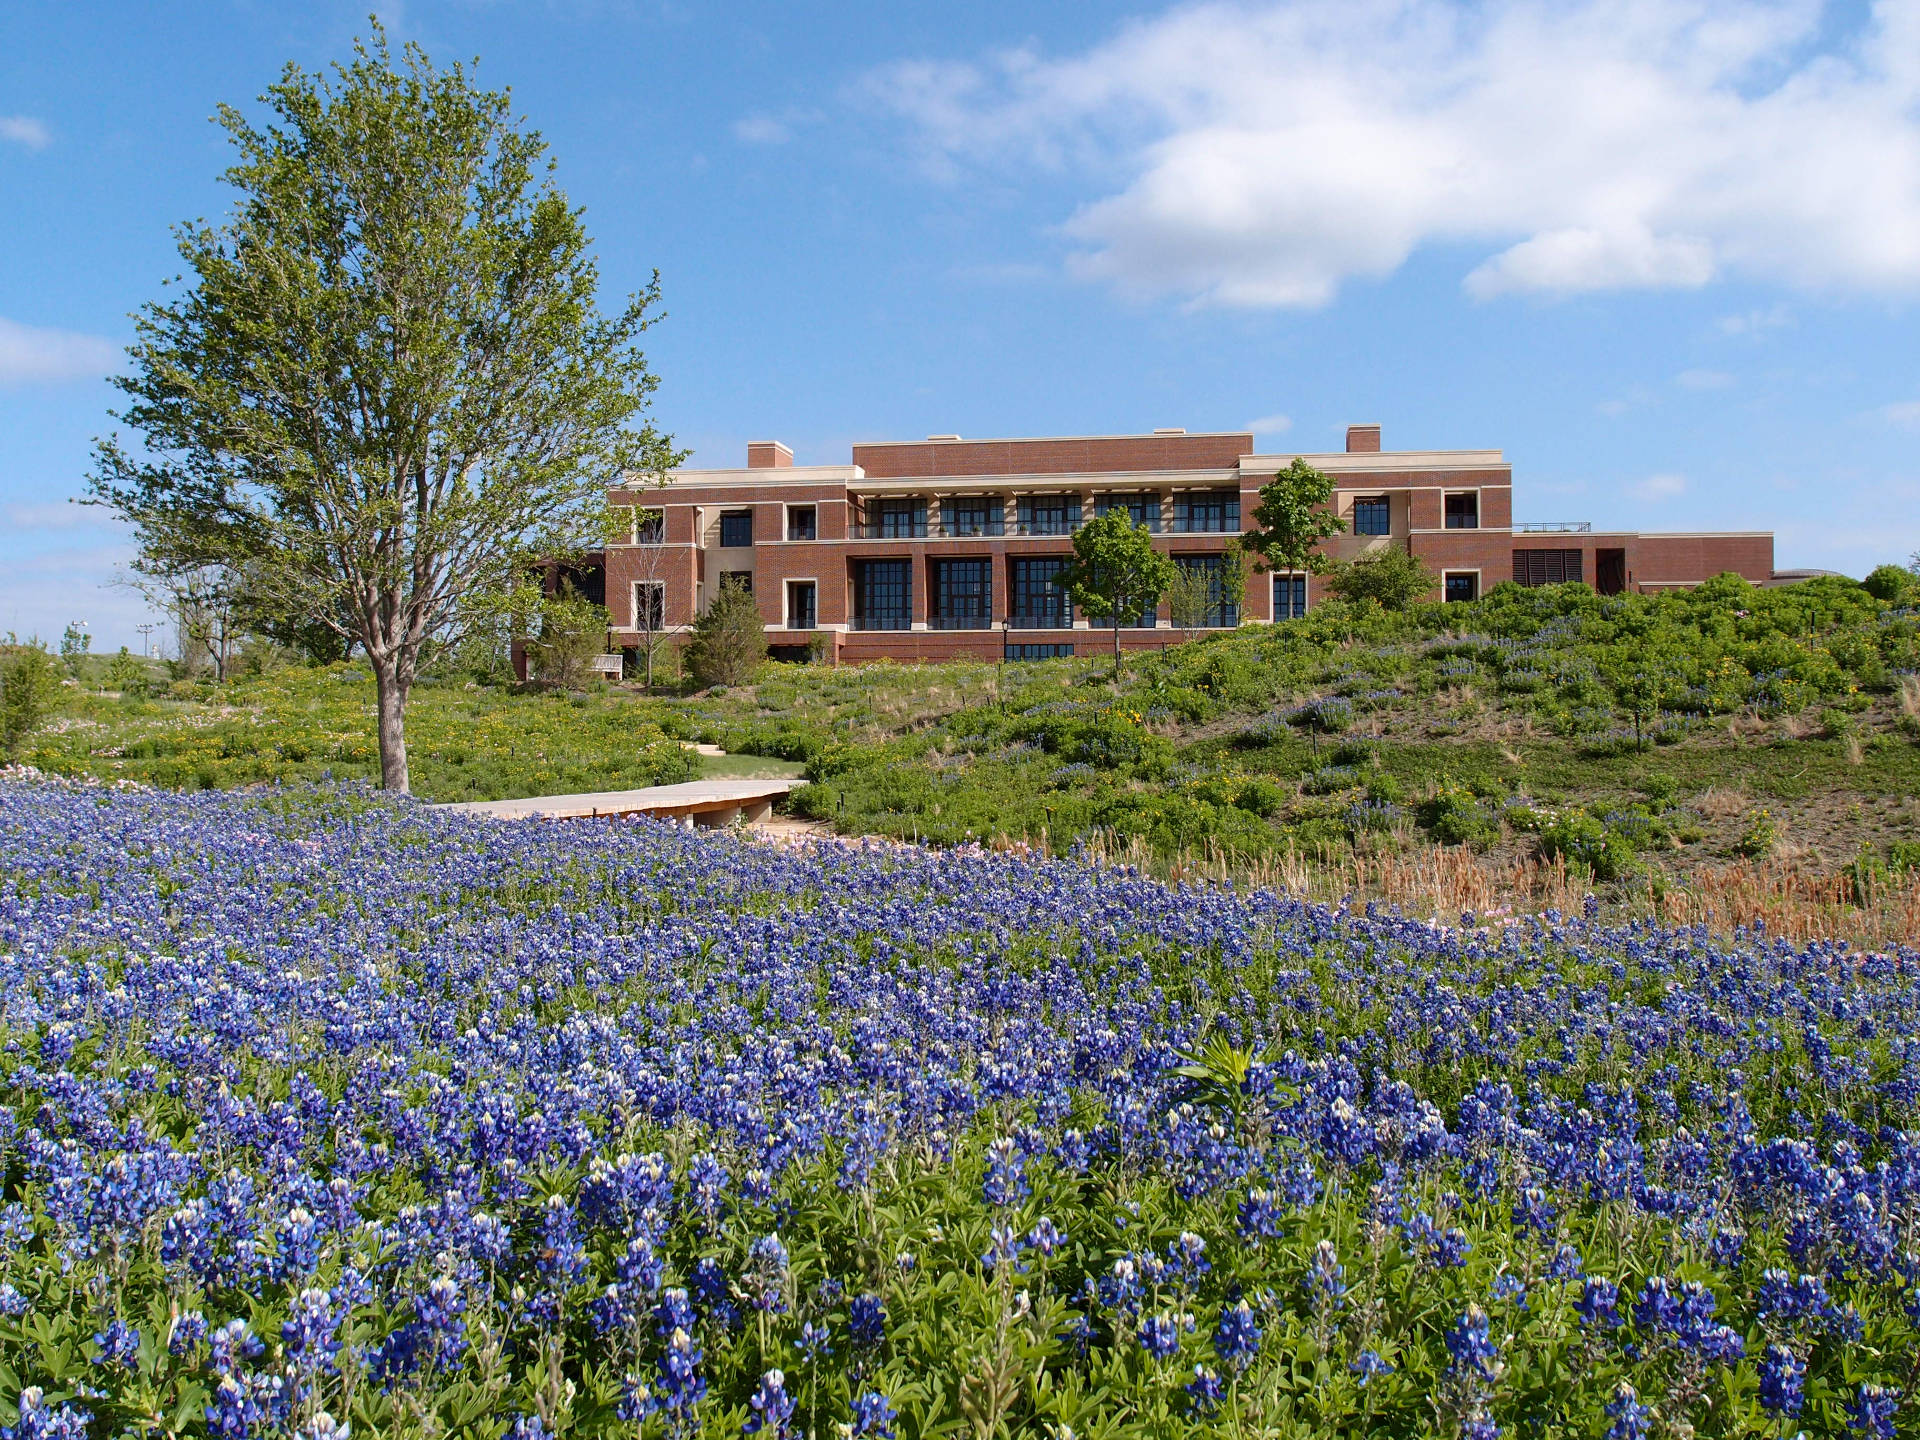 George W. Bush Presidential Center | Landscaping Services in Dallas